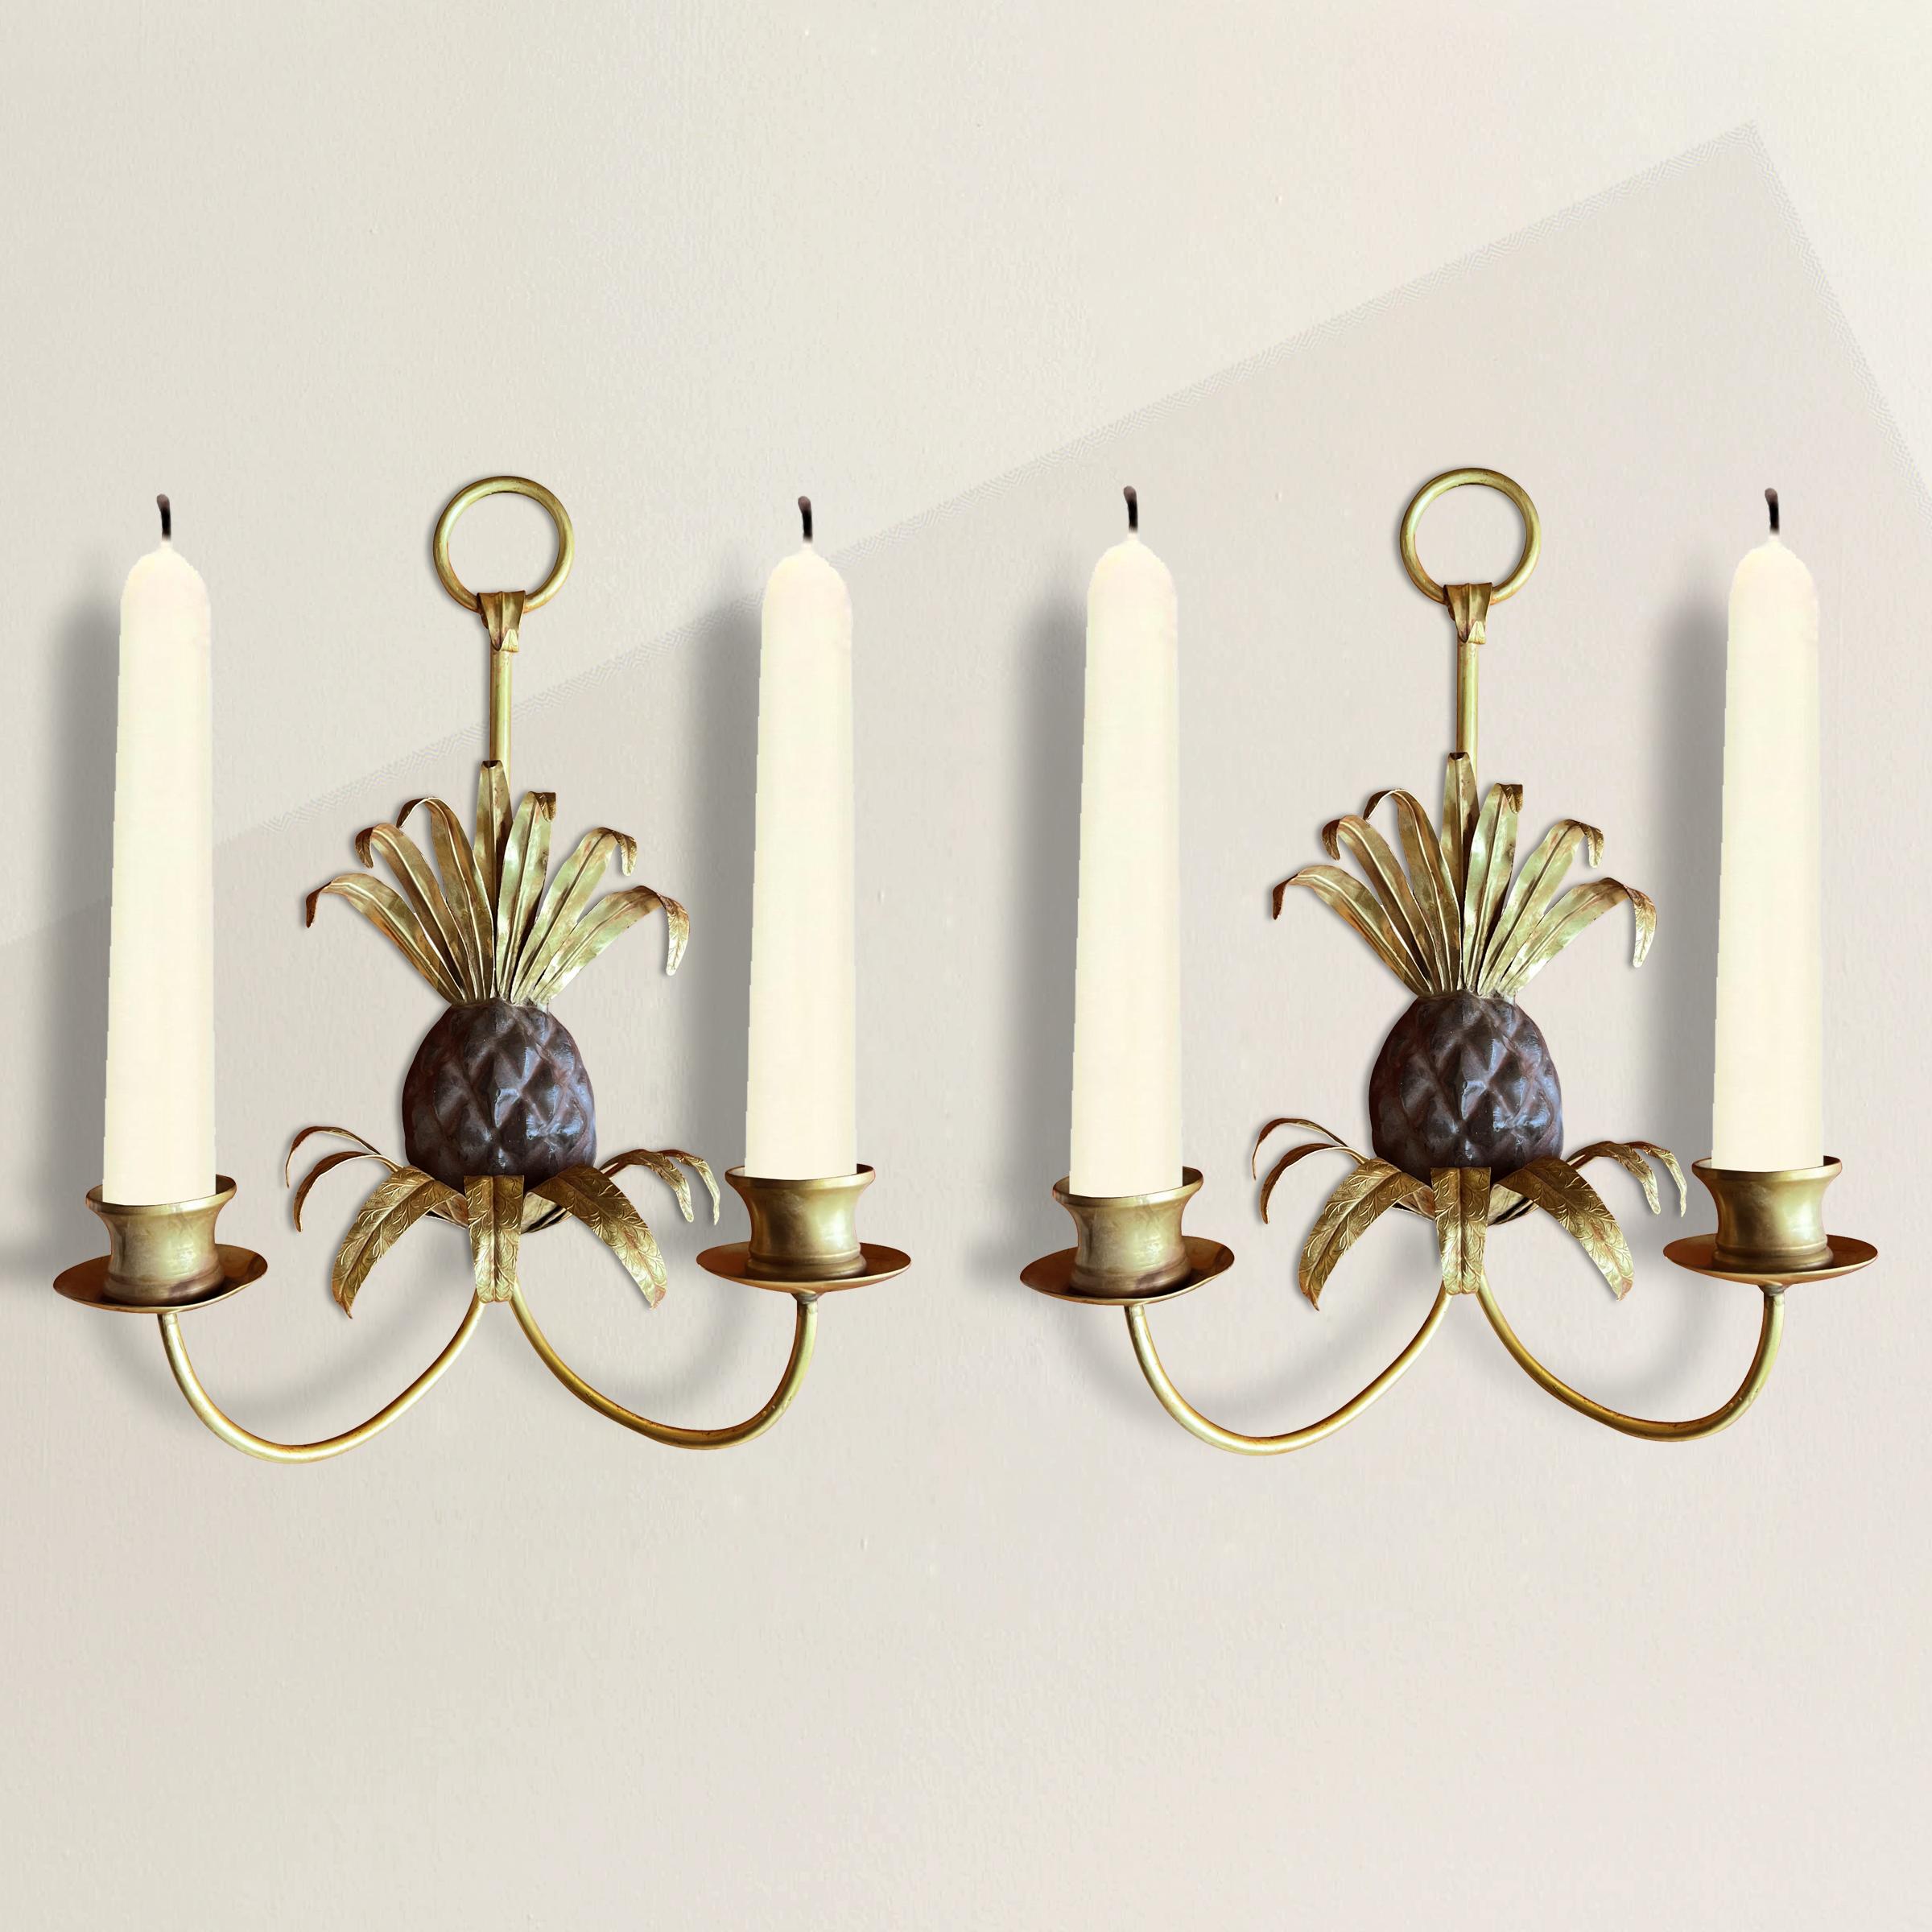 A chic and playful pair of Mid-20th Century French pineapple candle sconces with stamped brass crowns and leaves, arms and candle cups, and cast iron fruits. Pineapples have been symbols of friendship since the Colonial period in the US, and